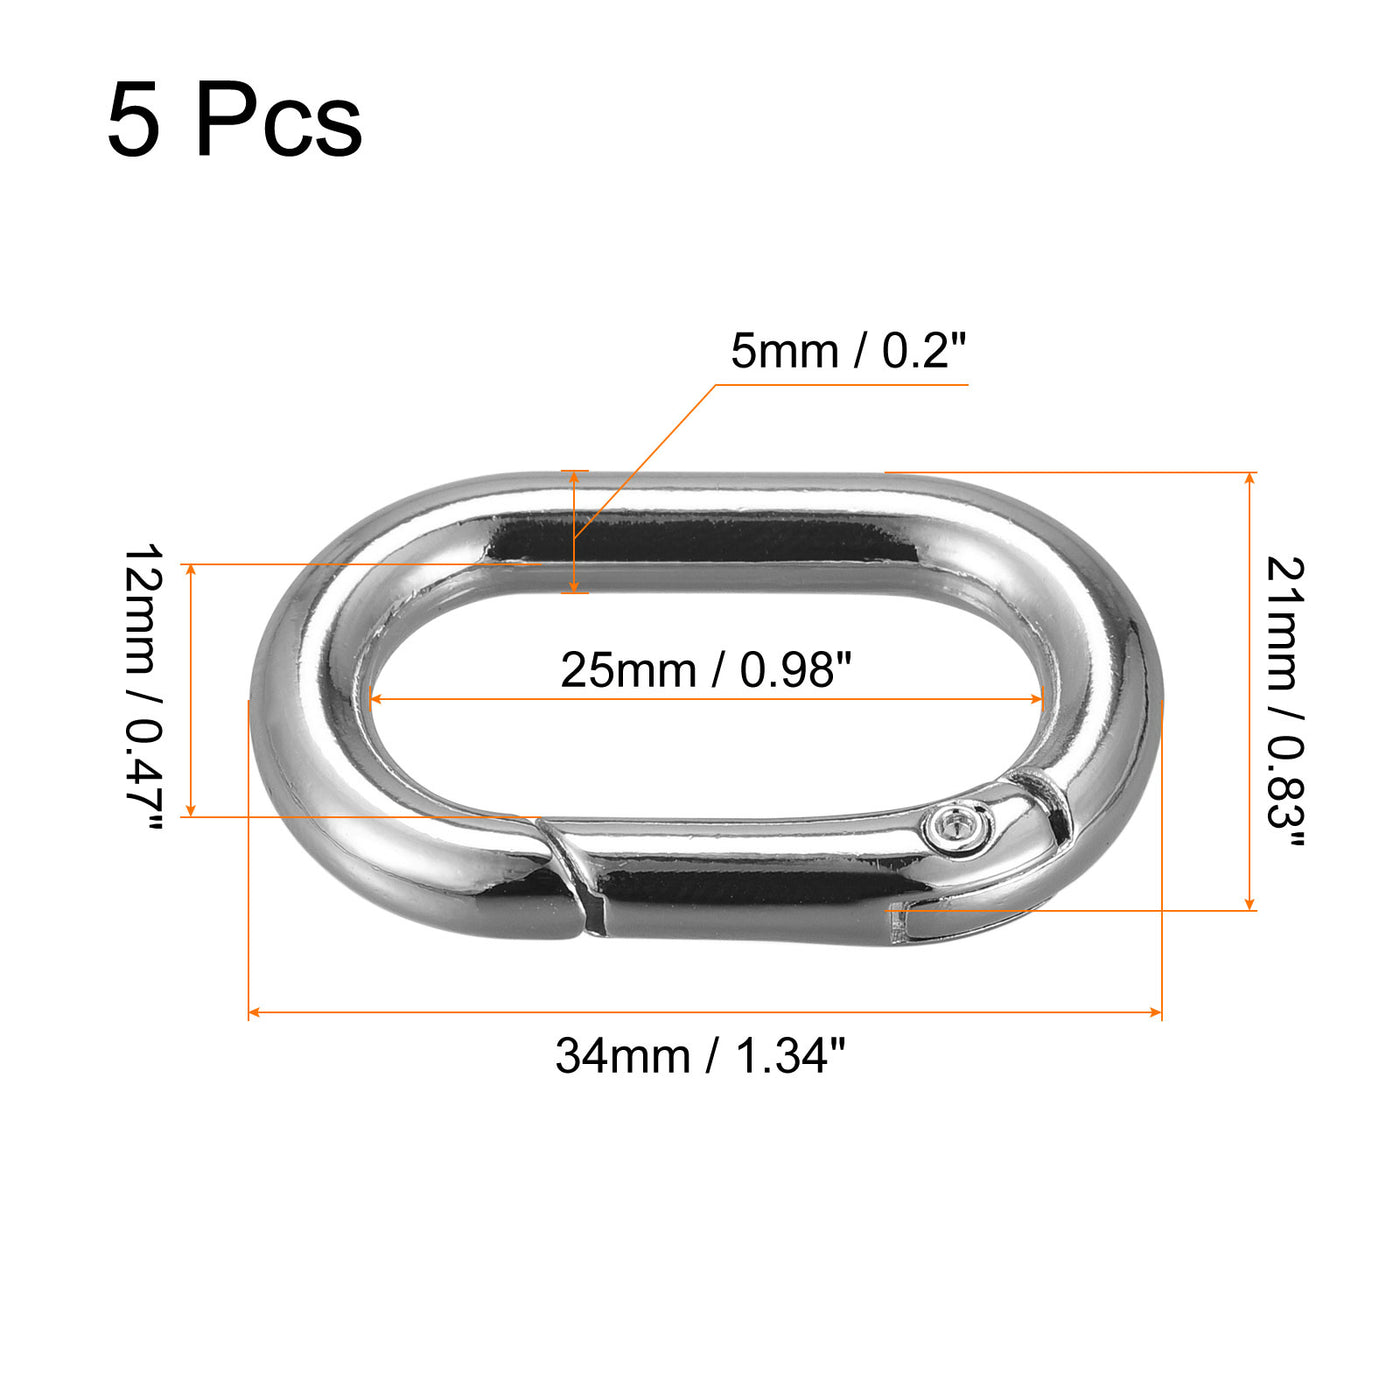 uxcell Uxcell 1.34" Spring Oval Ring Snap Clip Trigger for Bag Purse Keychain, 5Pcs Silver